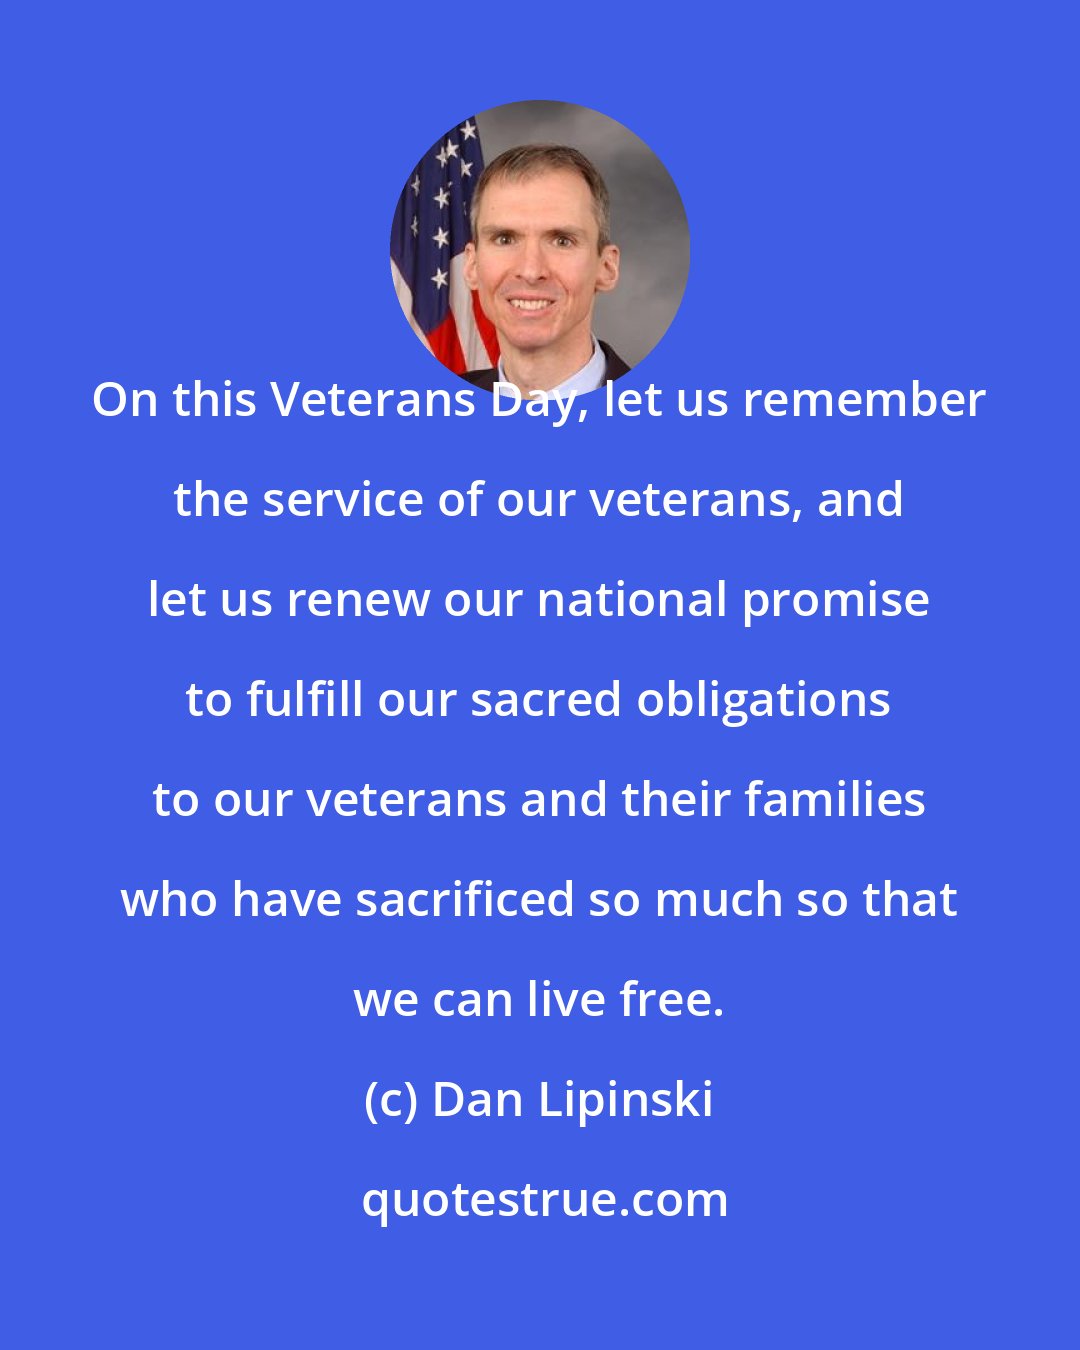 Dan Lipinski: On this Veterans Day, let us remember the service of our veterans, and let us renew our national promise to fulfill our sacred obligations to our veterans and their families who have sacrificed so much so that we can live free.